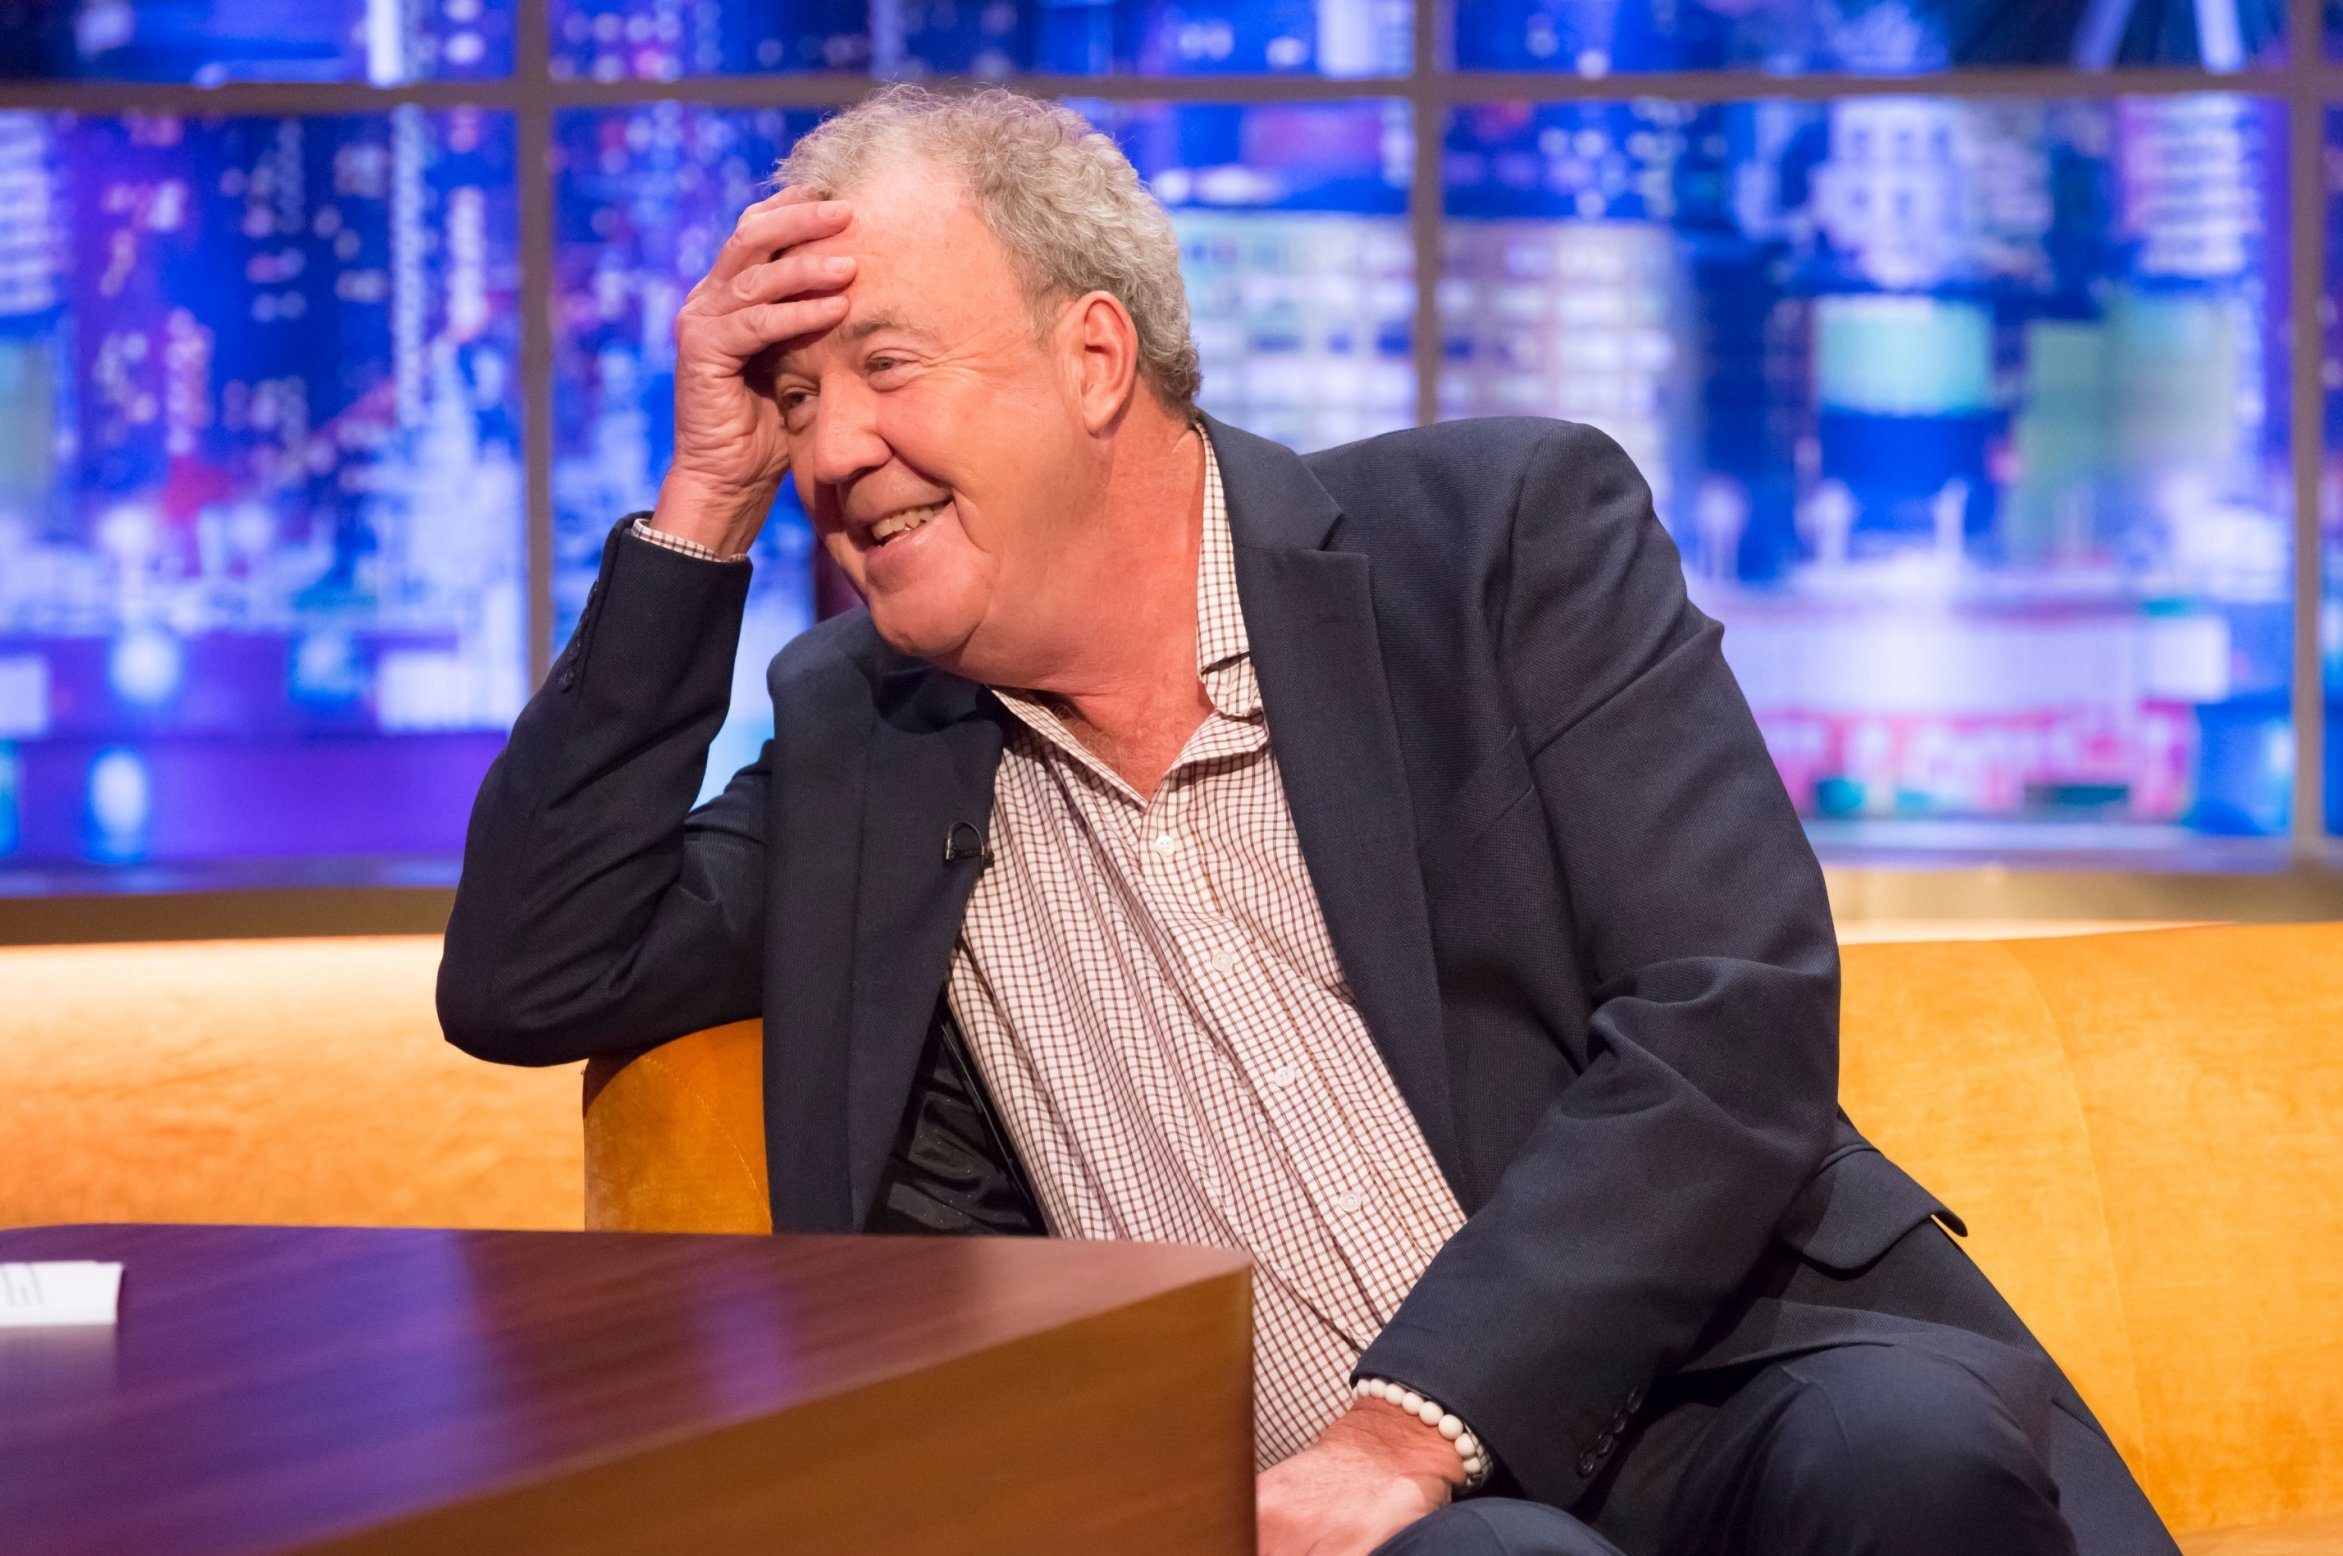 Jeremy Clarkson’s cryptic post has fans convinced The Grand Tour will be heading to Tanzania